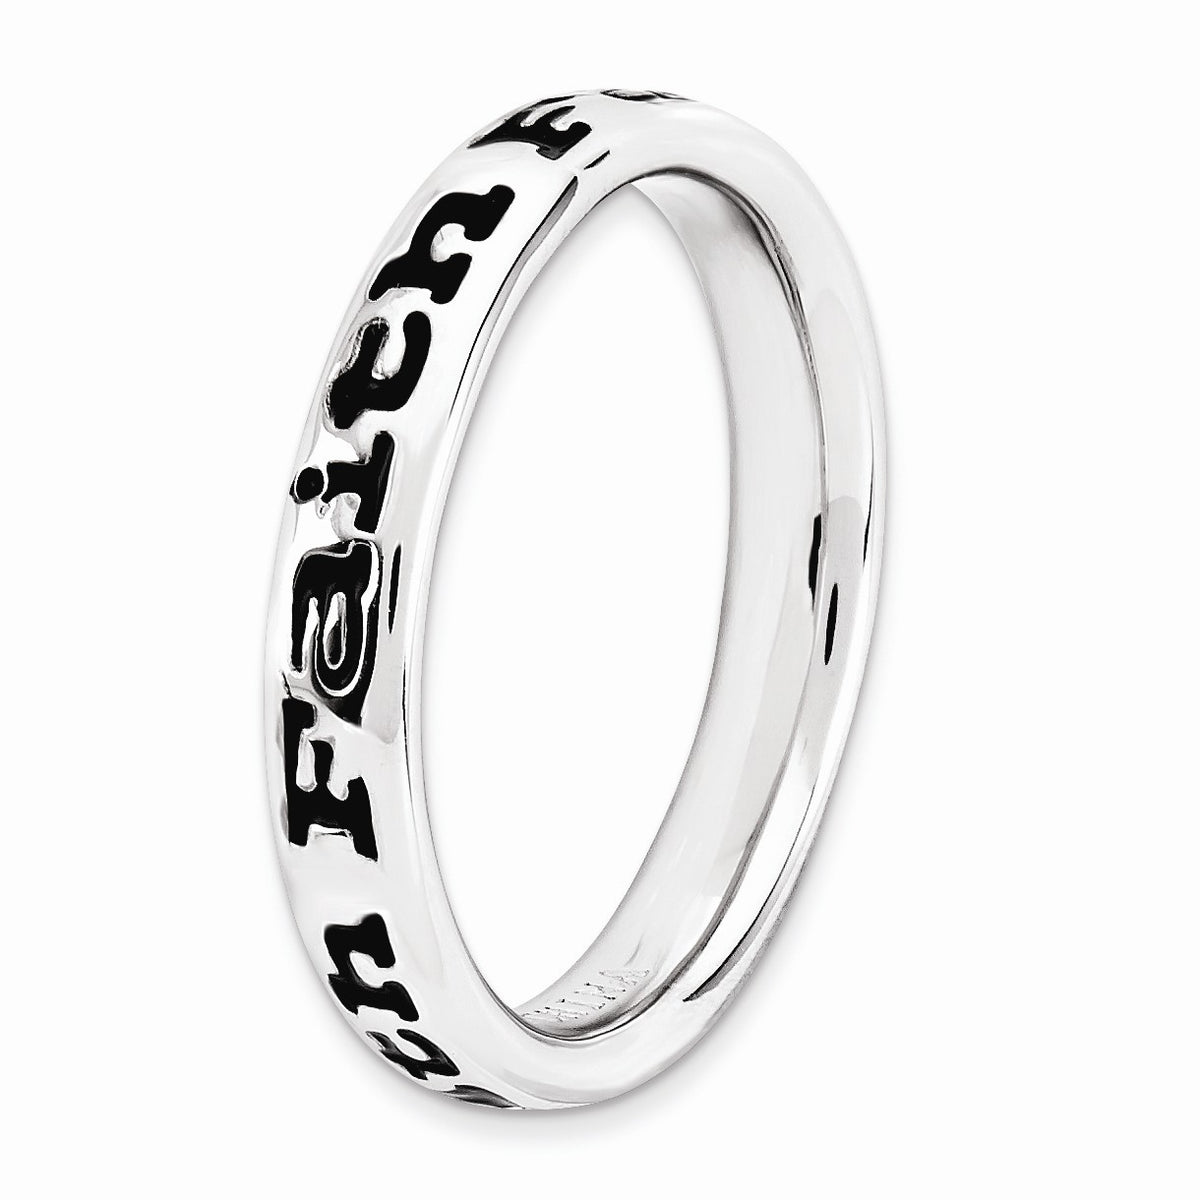 Alternate view of the Sterling Silver and Black Enameled Stackable Faith Band by The Black Bow Jewelry Co.